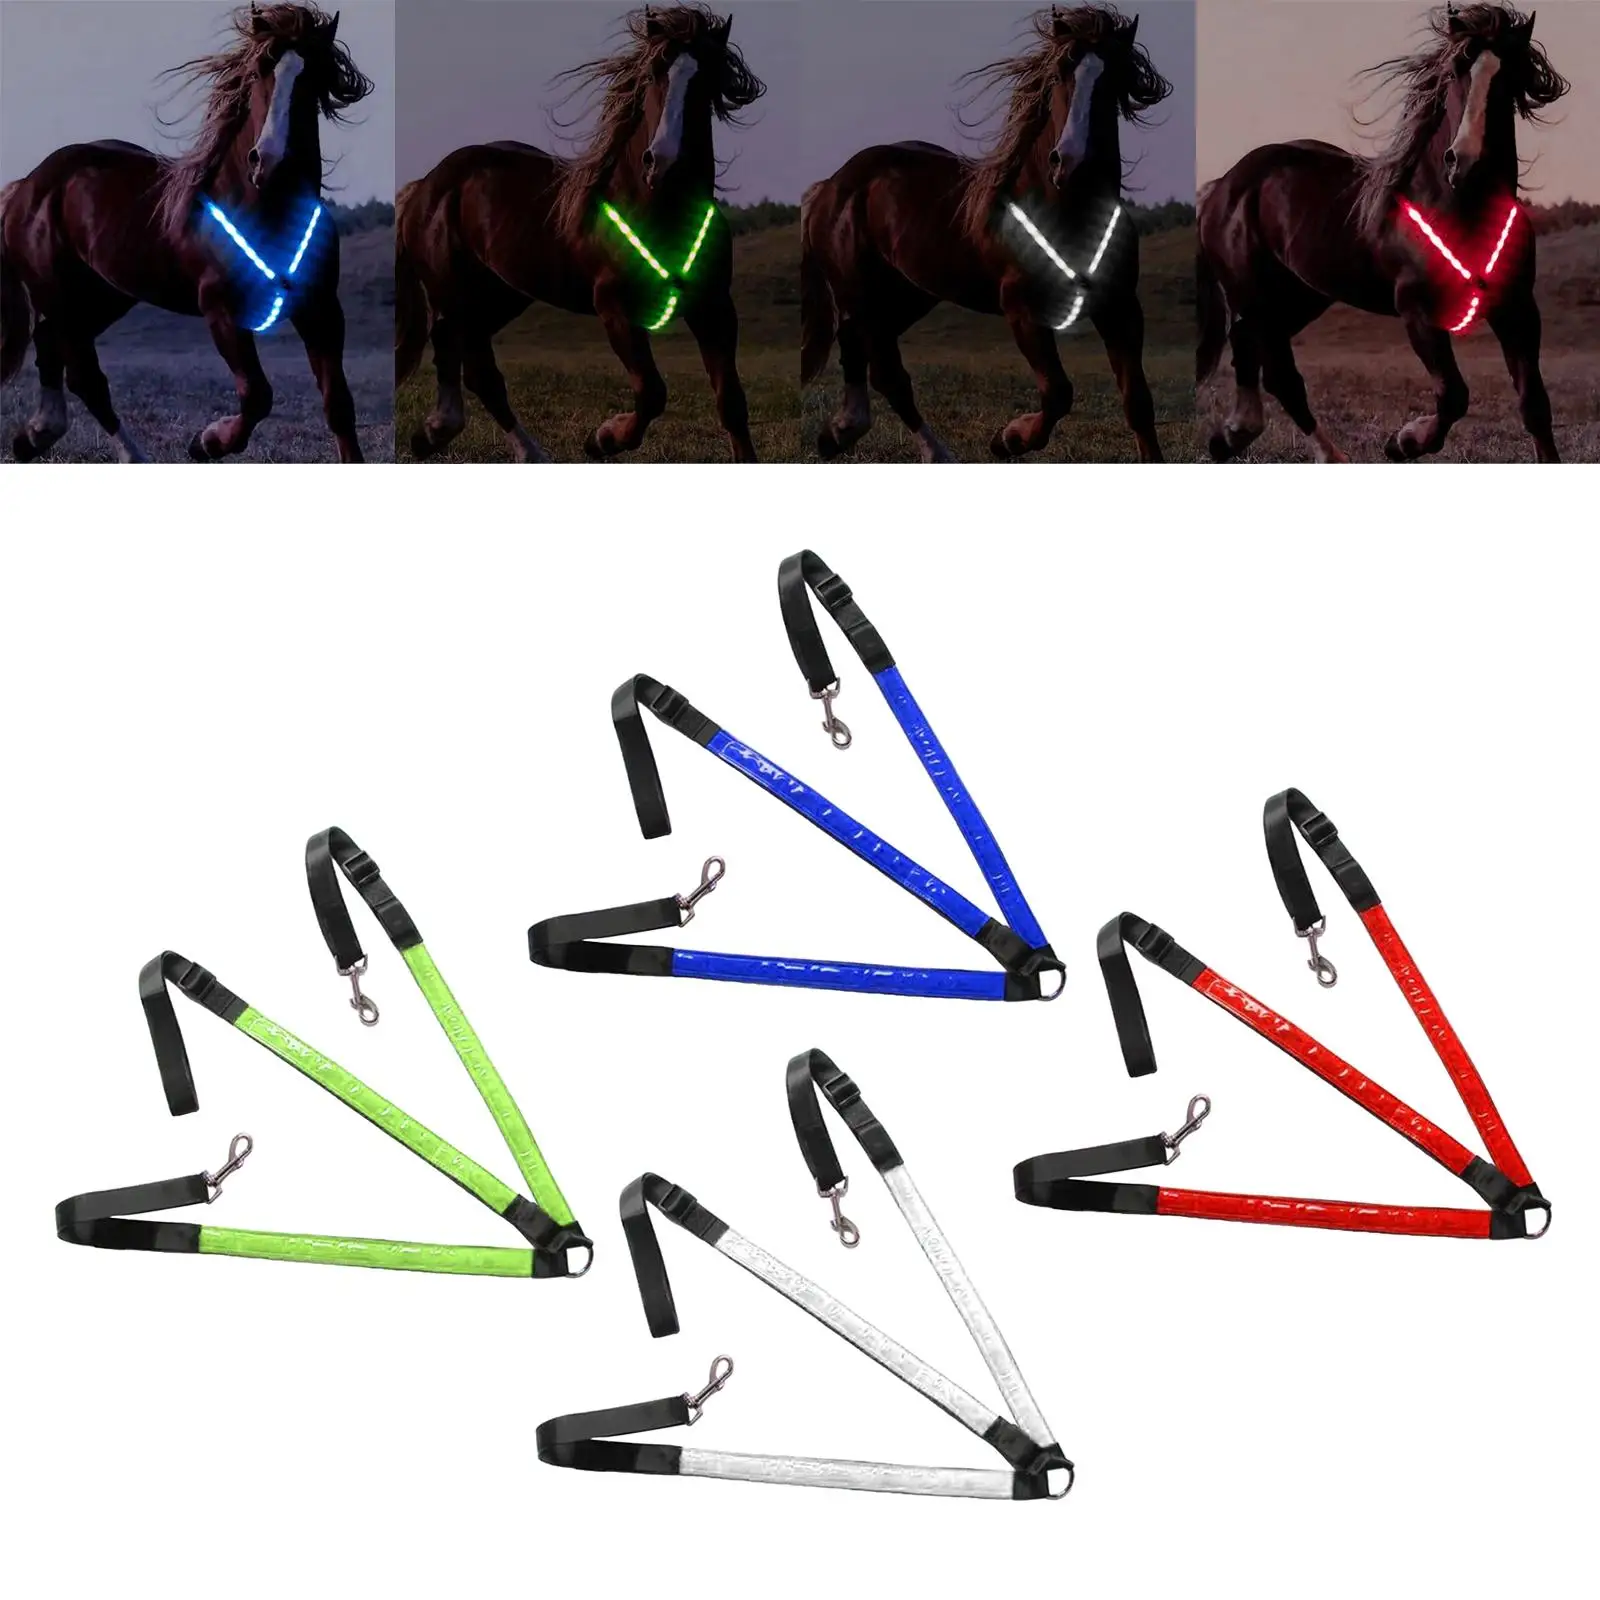 LED Horse Breastplate Collar Equestrian Safety Equipment Belt for Horse Show